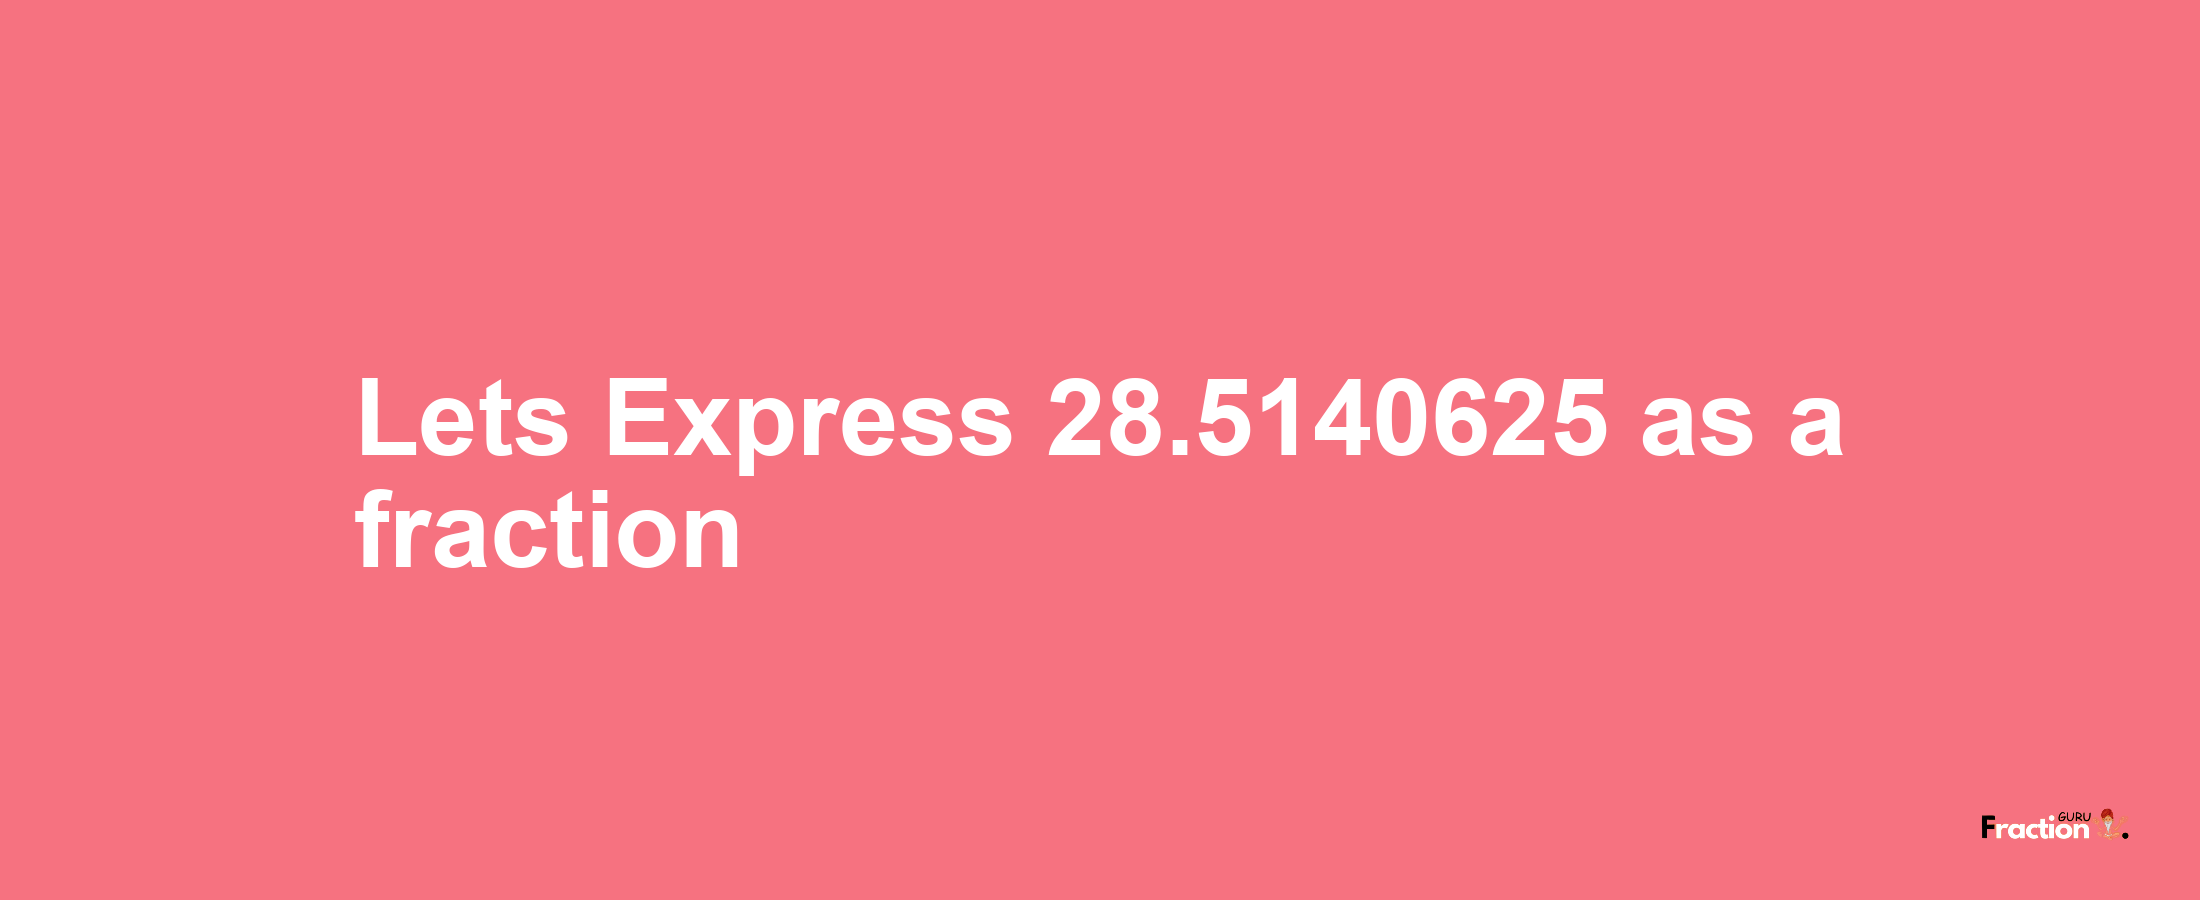 Lets Express 28.5140625 as afraction